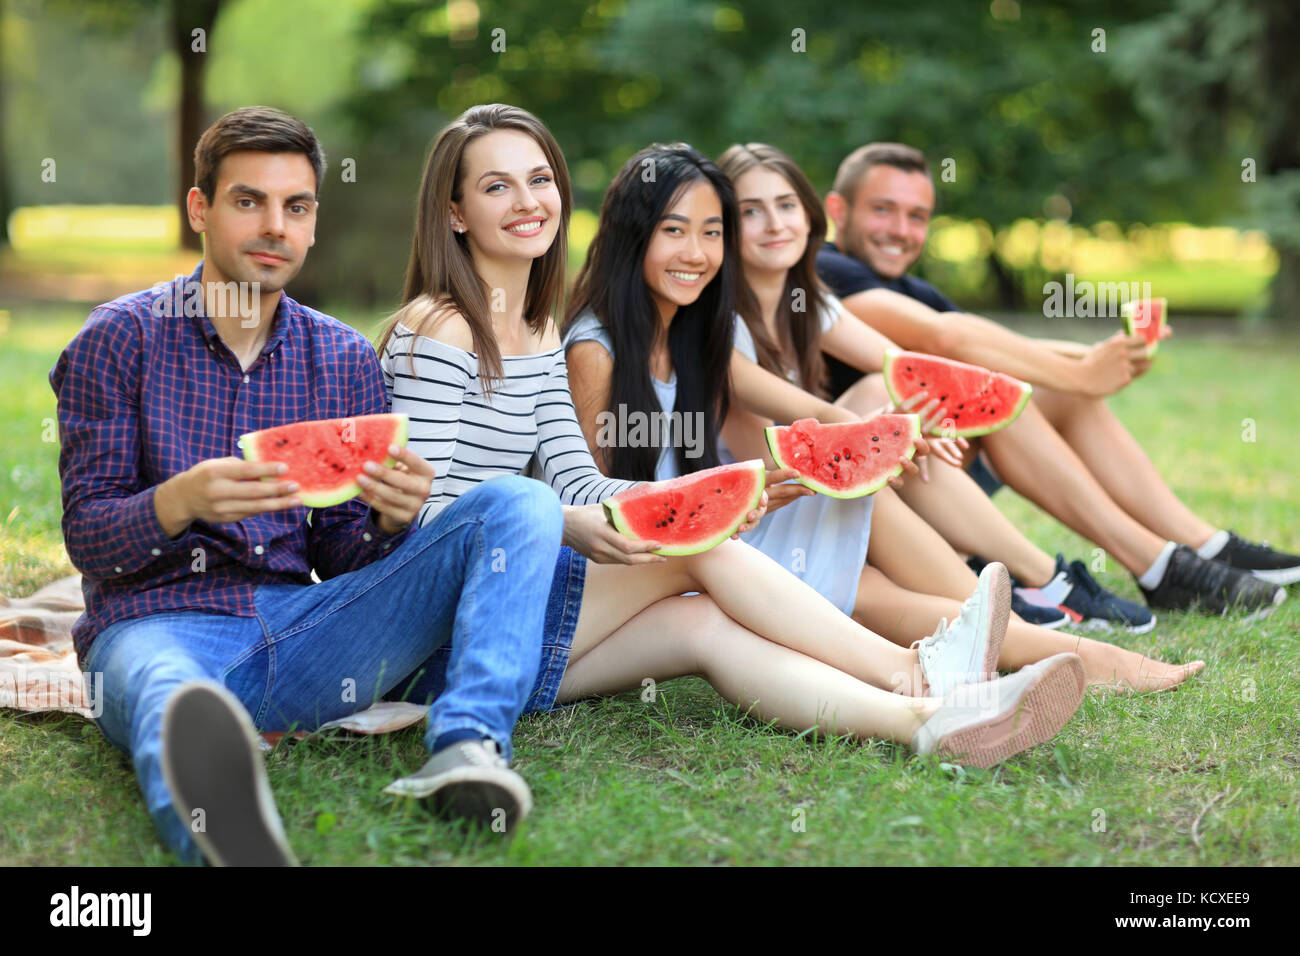 Five smiling women and men with slices of watermelon outdoors. Young friends students having fun at picnic with juicy fruit on warm day. Happy people  Stock Photo